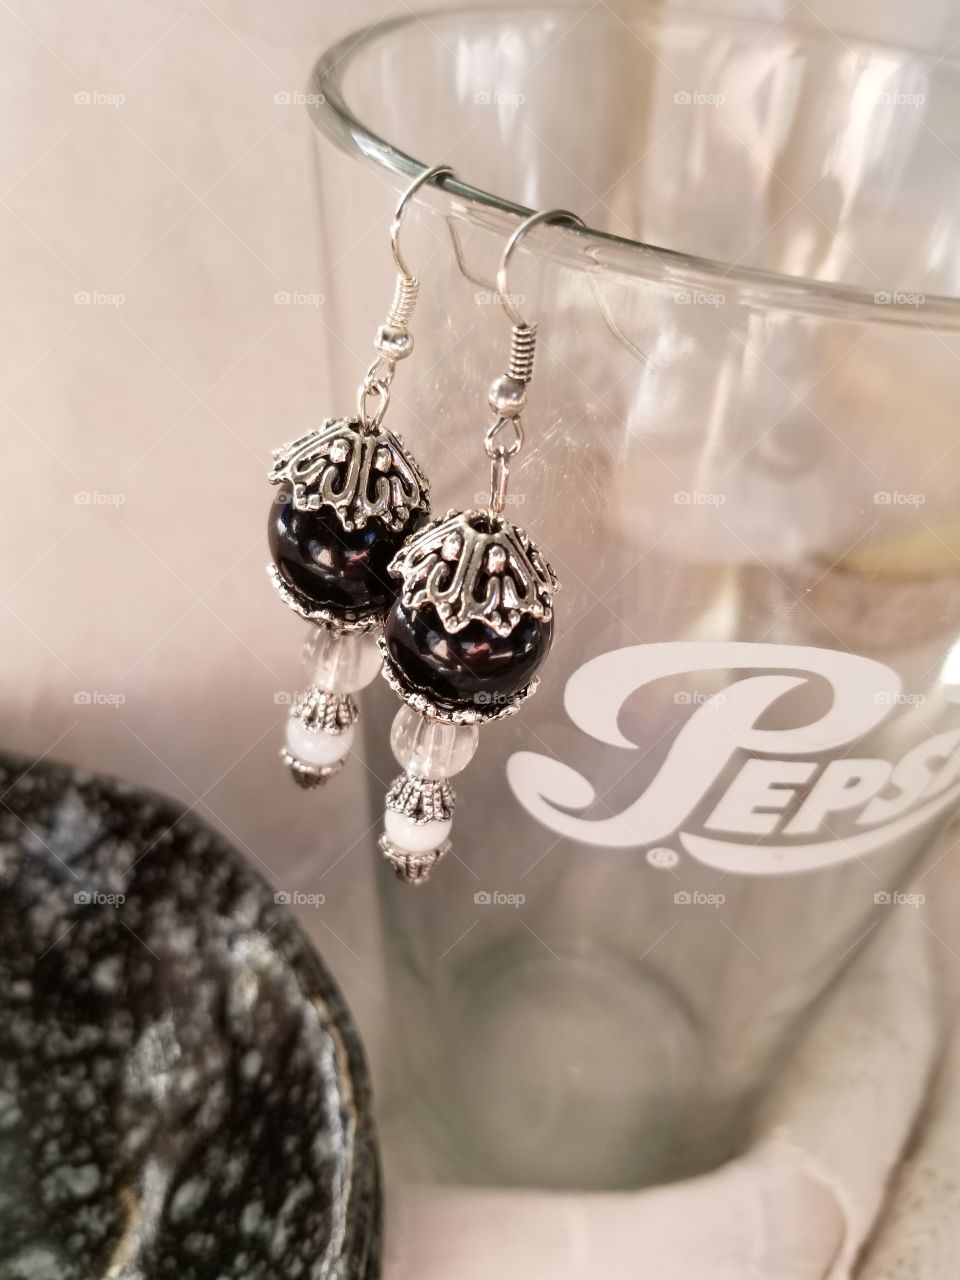 My handmade earrings (found on my etsy) hanging from a vintage Pepsi Cola glass.